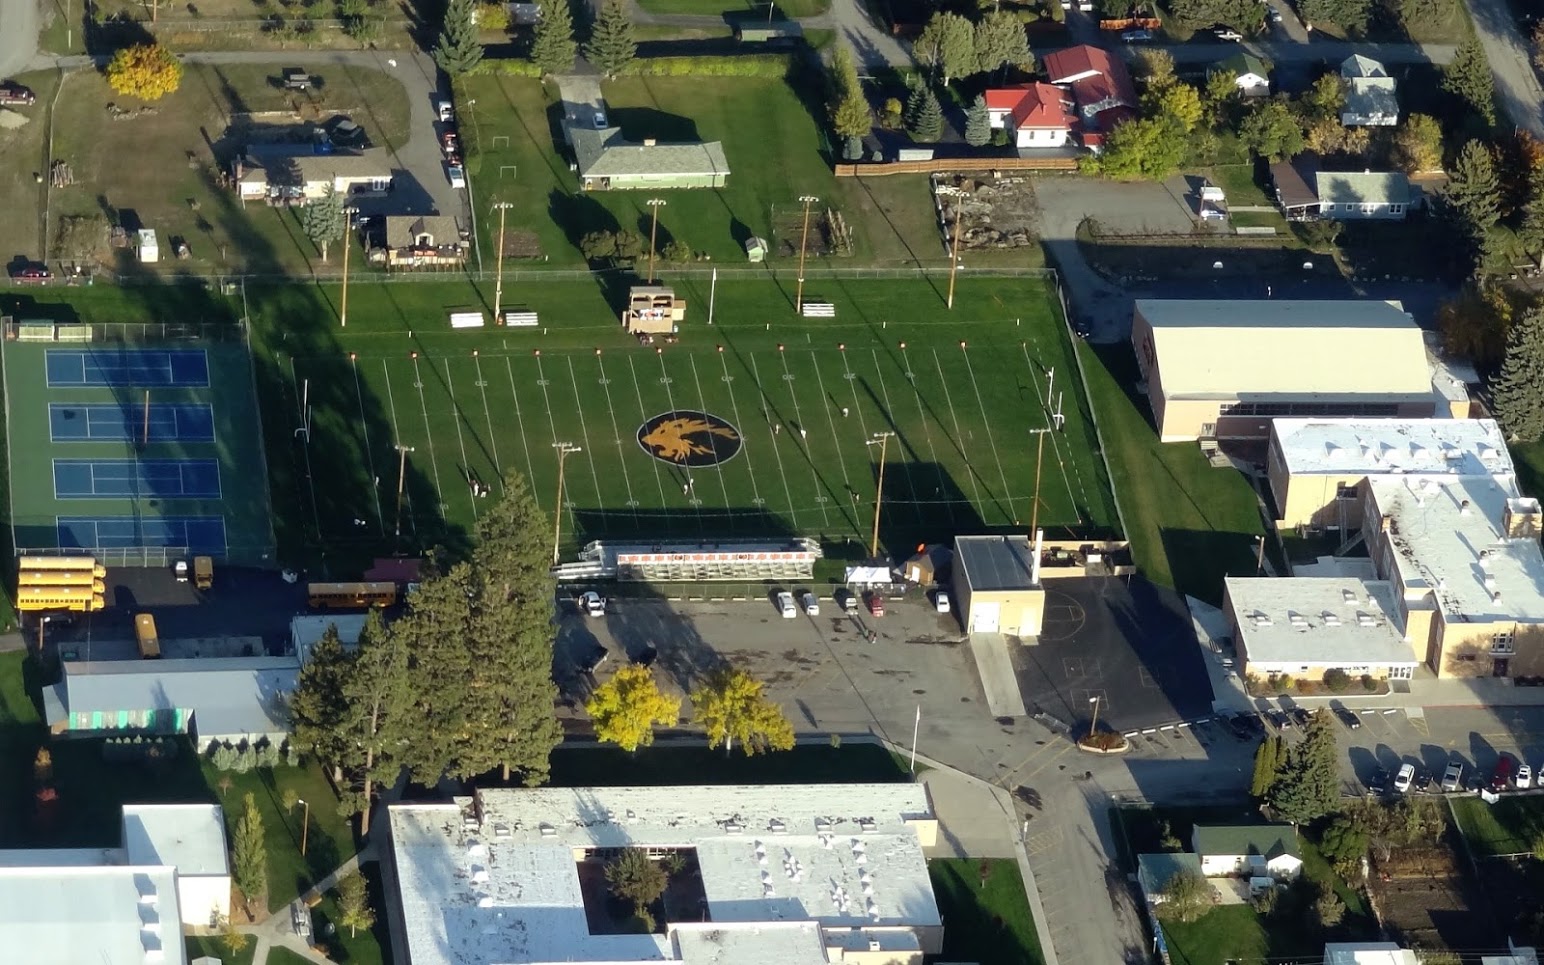 LCH Football Field Aerial View 